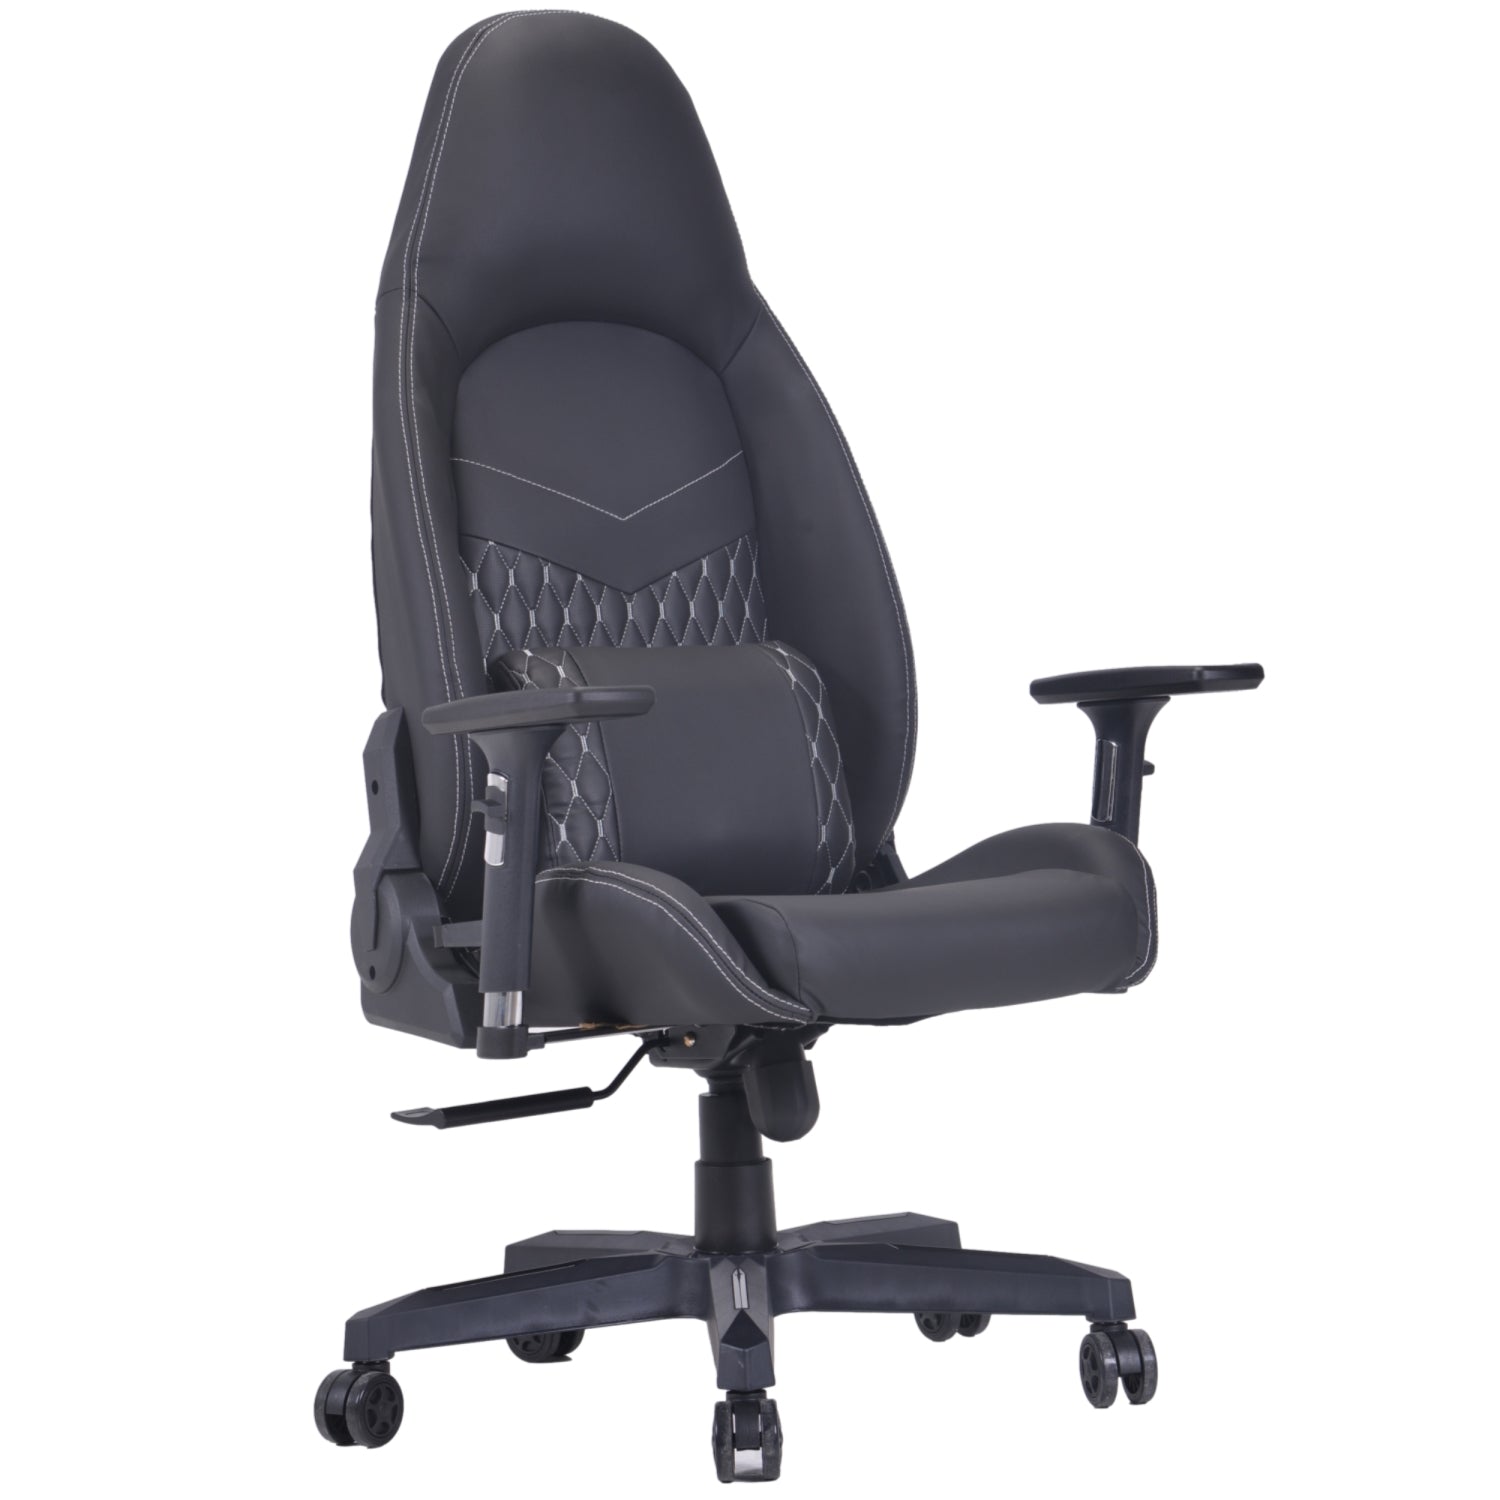 ViscoLogic Cayenne-Ultra Ergonomic Height Adjustable Reclining Sports Styled Home Office Racing Gaming Chair for PC Video Game Computer (Black)